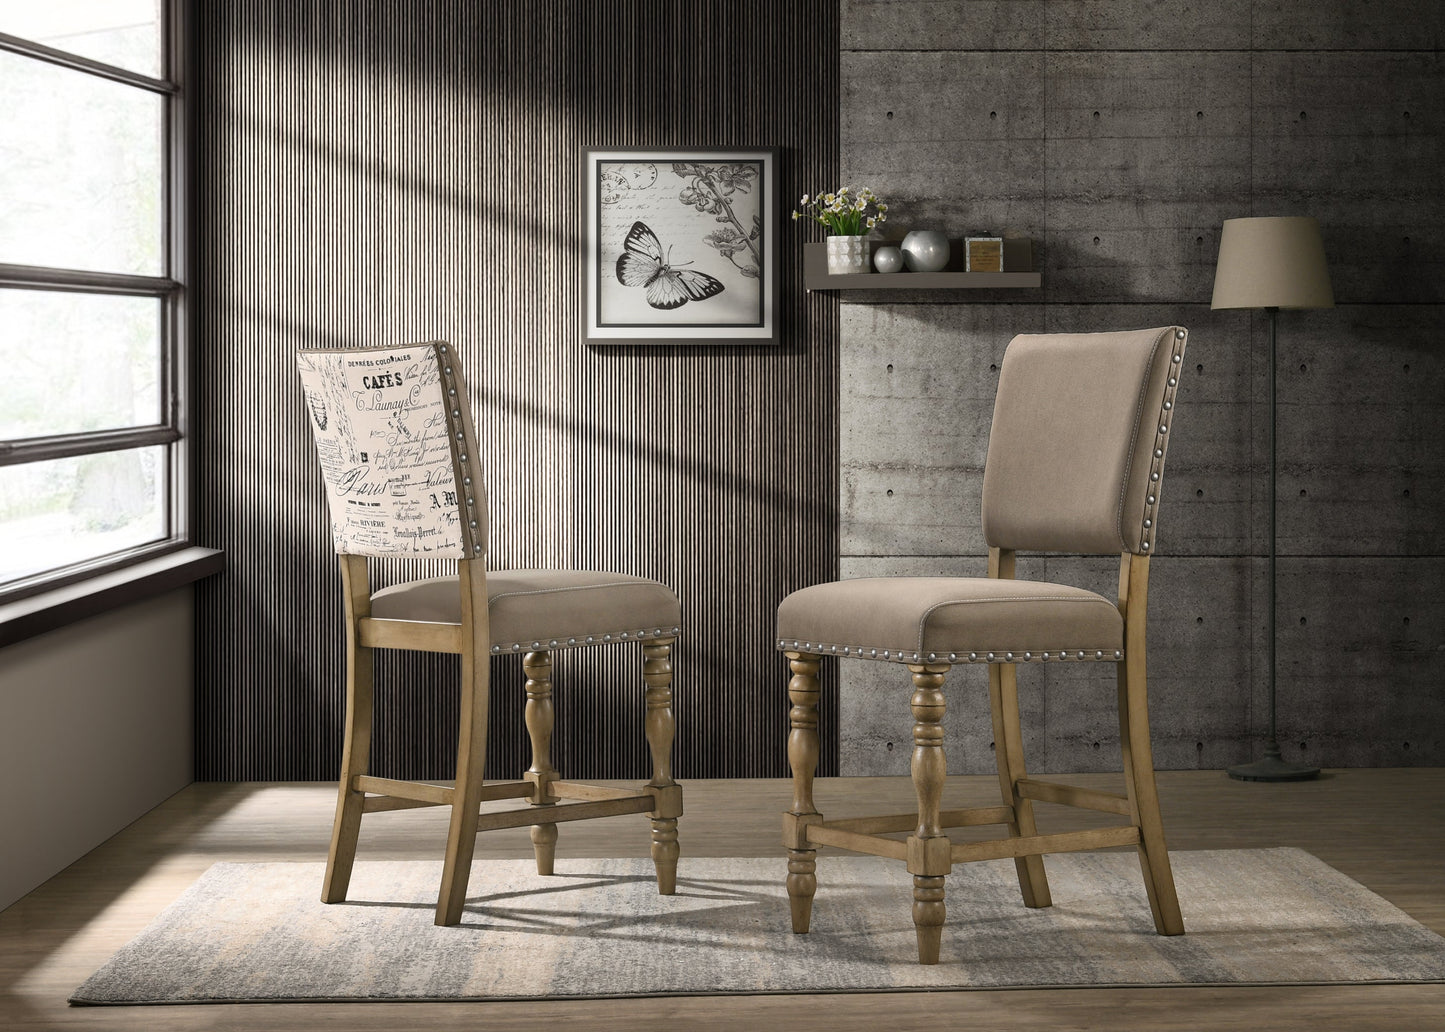 Birmingham 7-piece Counter Height Dining Set, Driftwood Finish Trestle Table with 6 Chairs